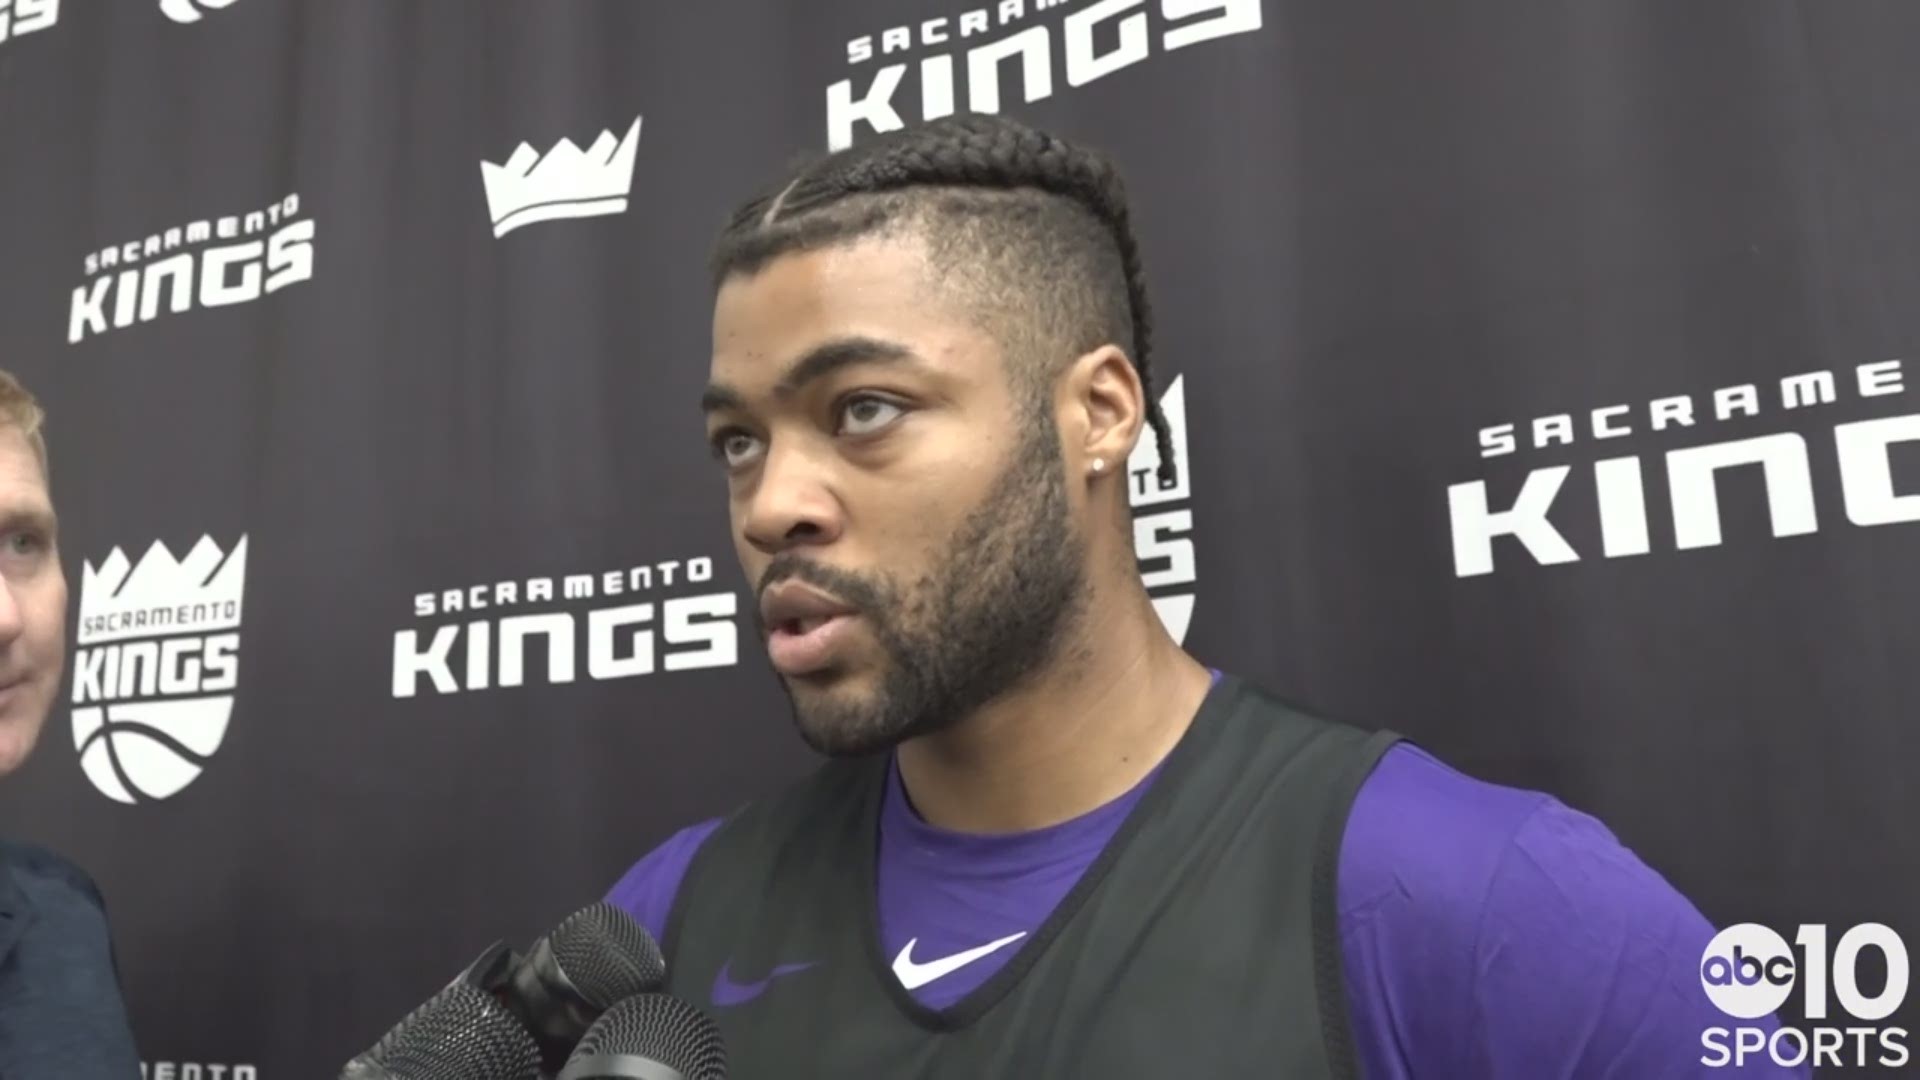 Kings point guard Frank Mason III discusses his outlook of heading into his third straight year of summer league with Sacramento, what he's looking to accomplish with the opportunity in front of him and his view of the team's changes to the coaching staff and the roster.